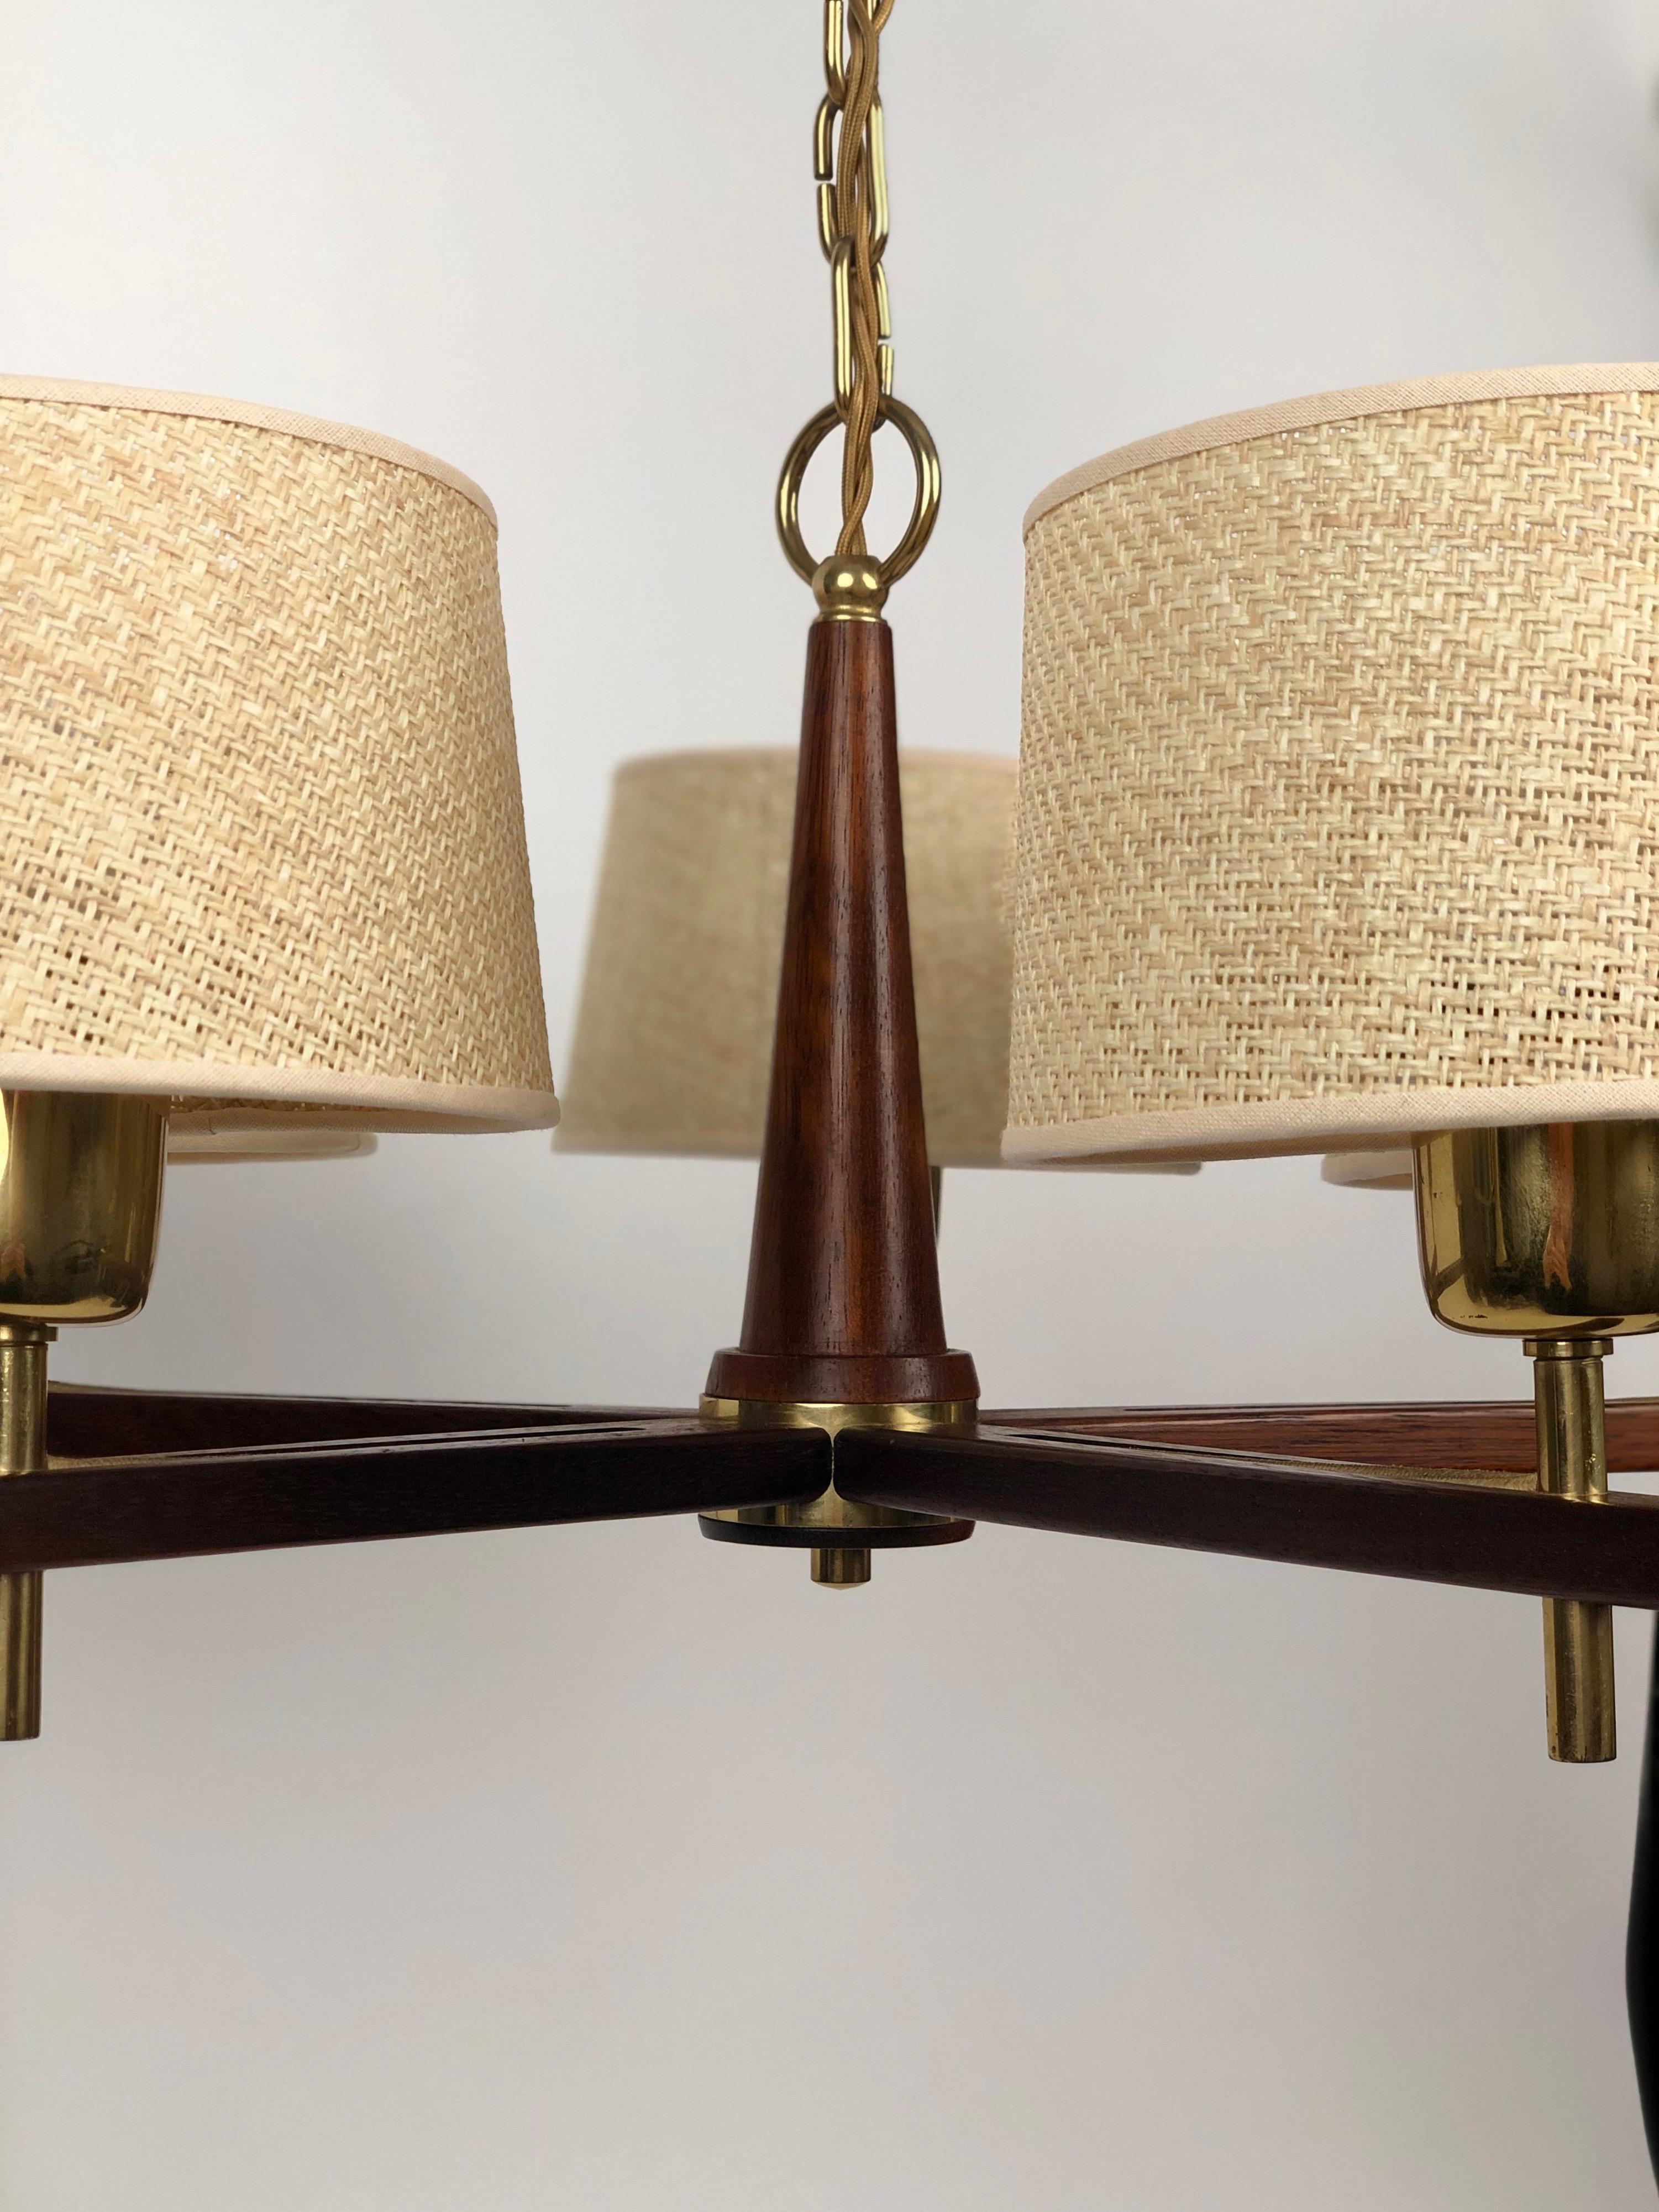 20th Century Five Arms Chandelier in Teak Wood and Brass with Cane Shades, 1960, Austria For Sale